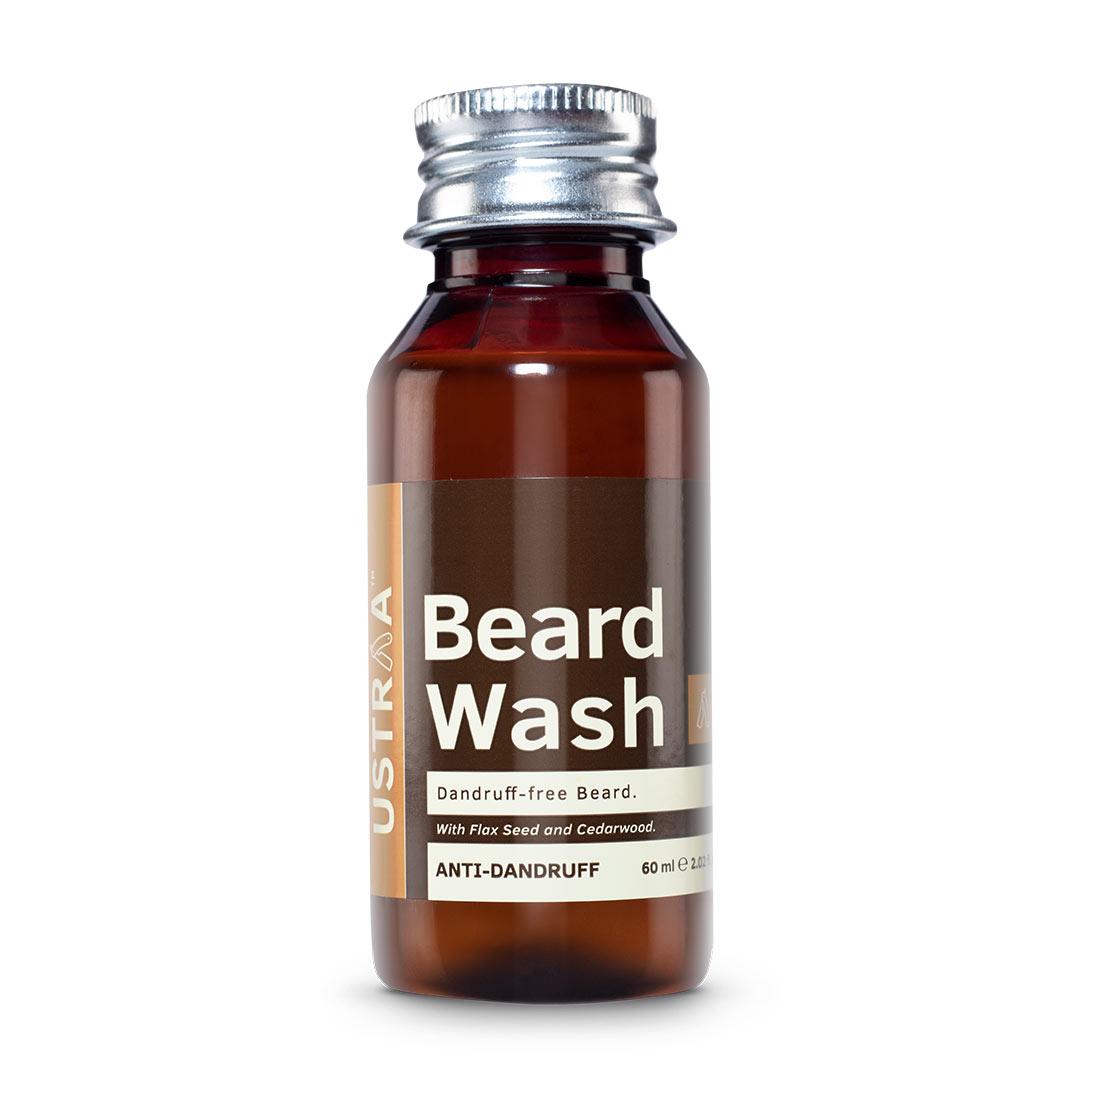 Ustraa Anti Dandruff Beard Wash 60 ml - An Easy to Wash Beard wash with Flax Seed Oil, Cedarwood Oil and Prickly Pear Cactus Extract to Prevent Post Wash Tanning 